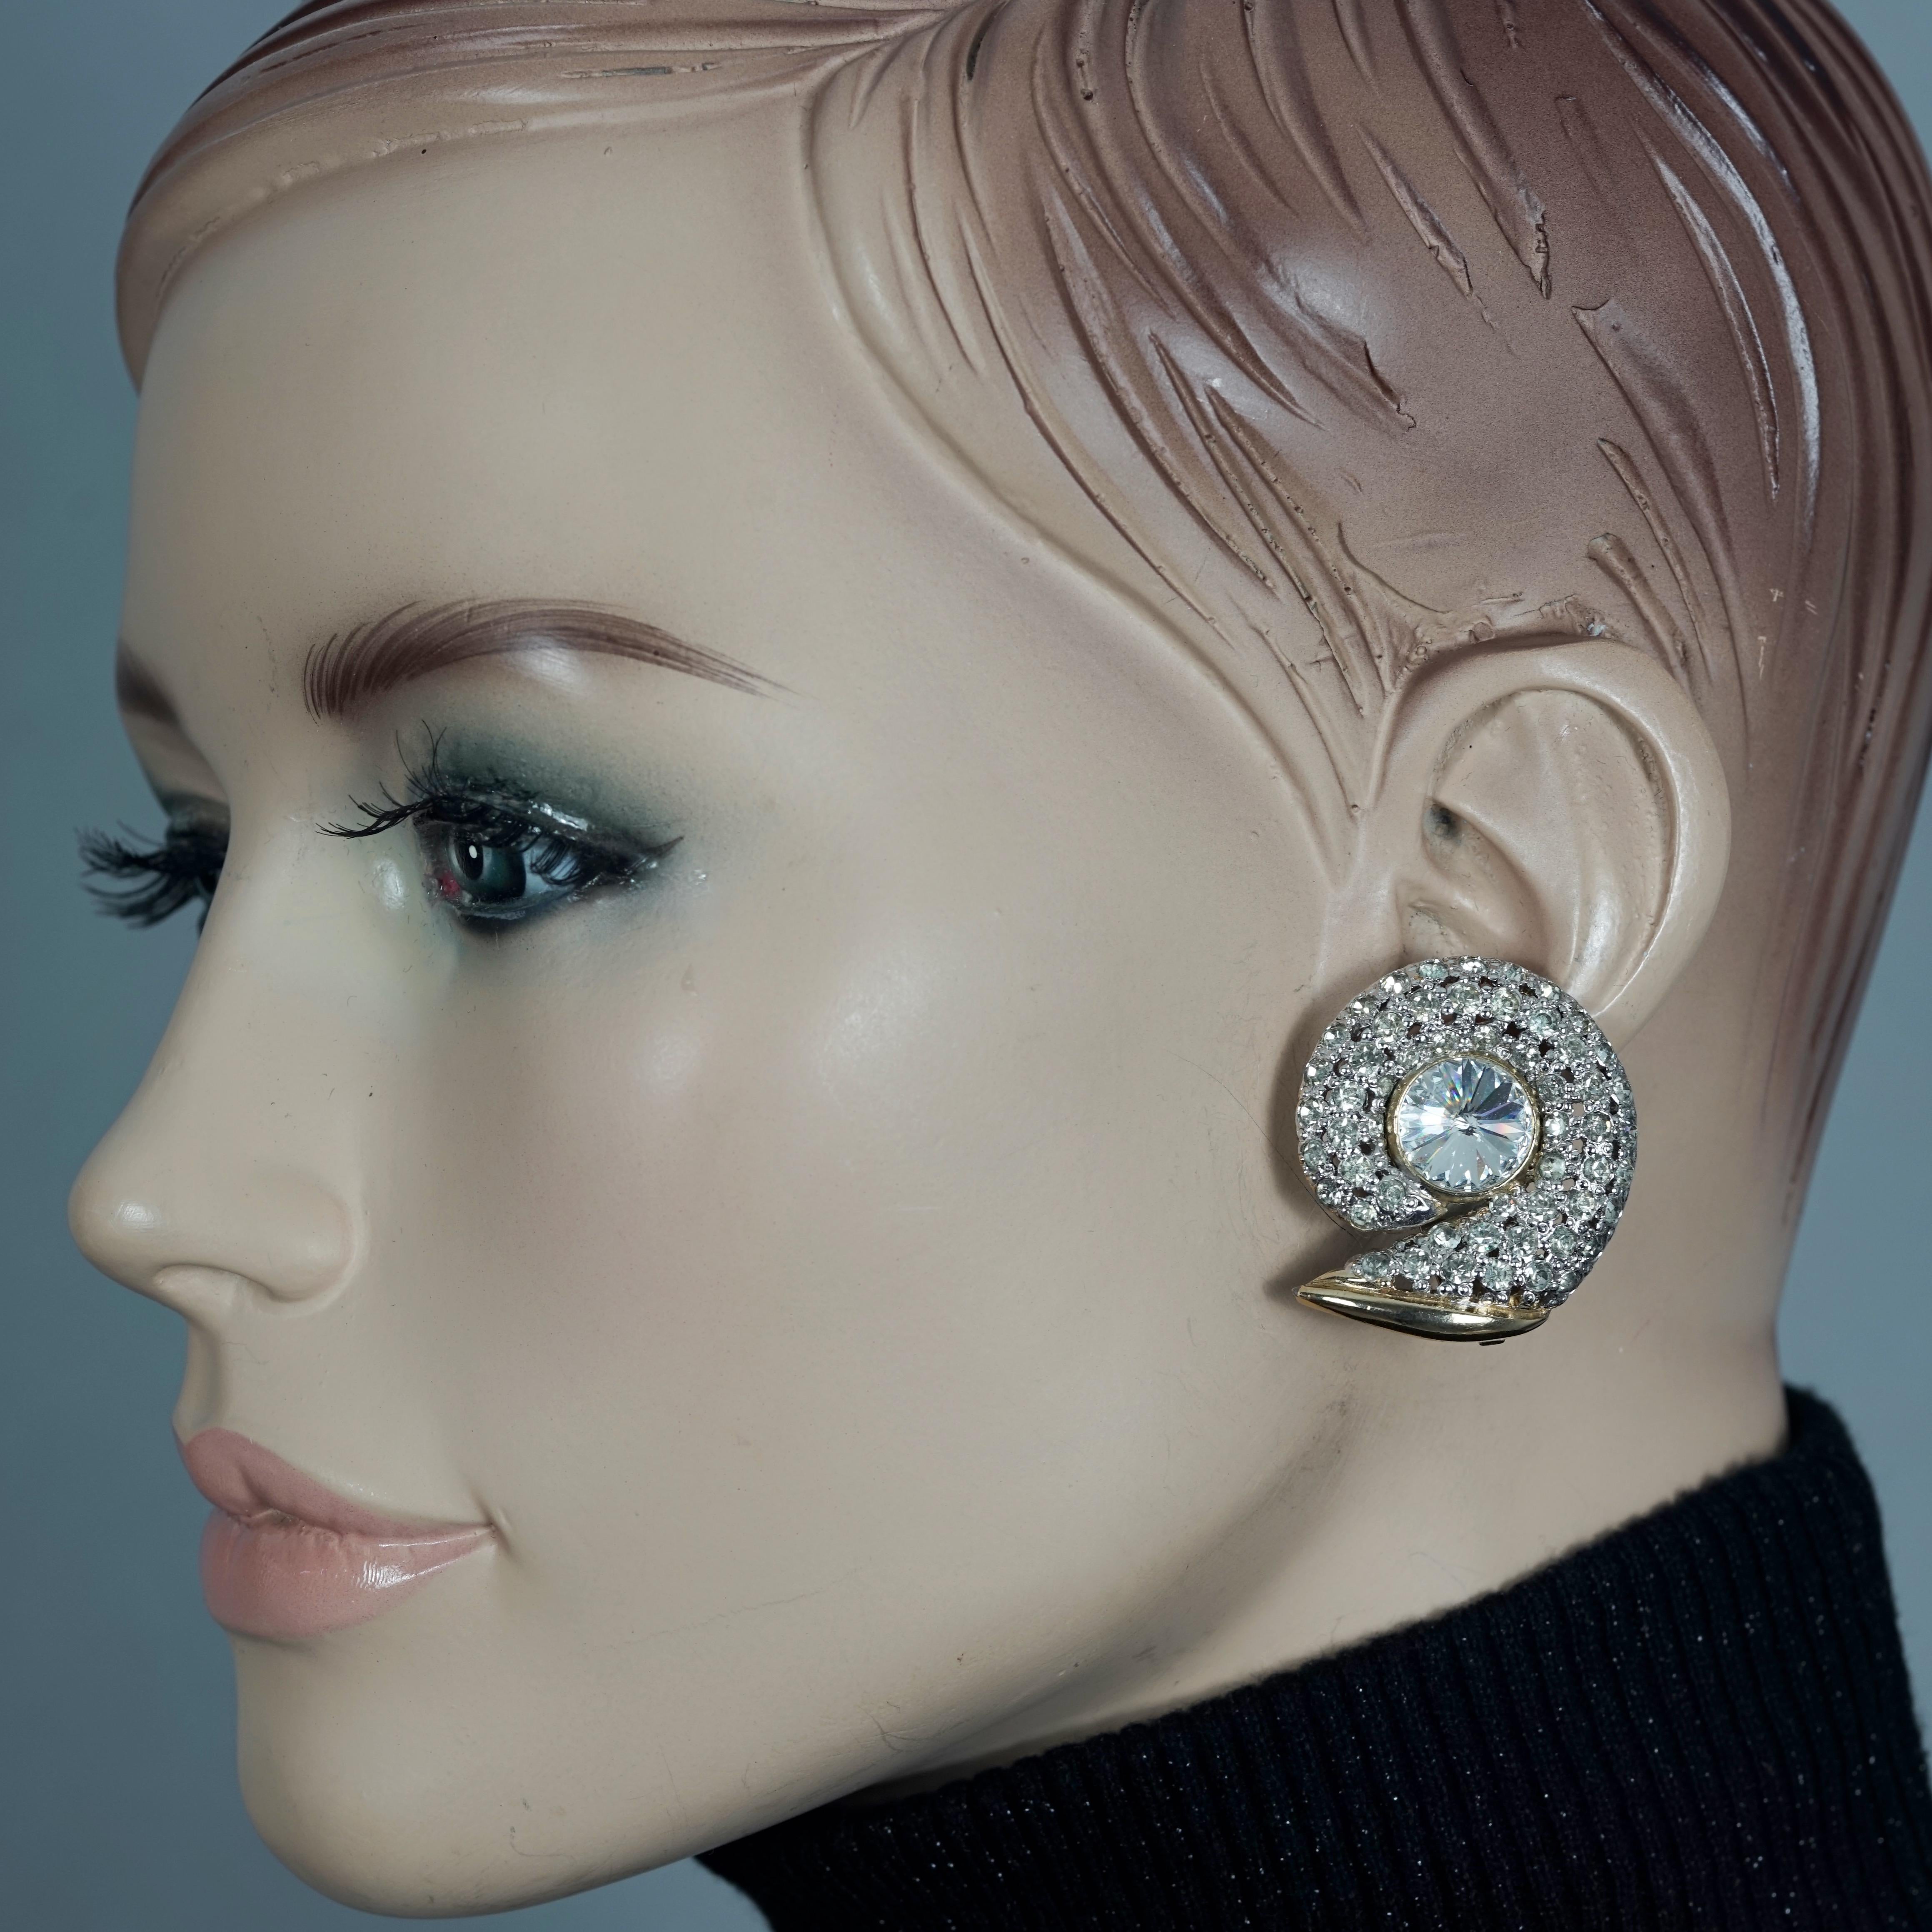 Vintage VALENTINO Snail Rhinestone Earrings

Measurements:
Height: 1.38 inches (3.5 cm)
Width: 1.22 inches (3.1 cm)
Weight per Earring: 14 grams

Features:
- 100% Authentic VALENTINO.
- Snail earrings studded with clear rhinestones.
- Gold tone